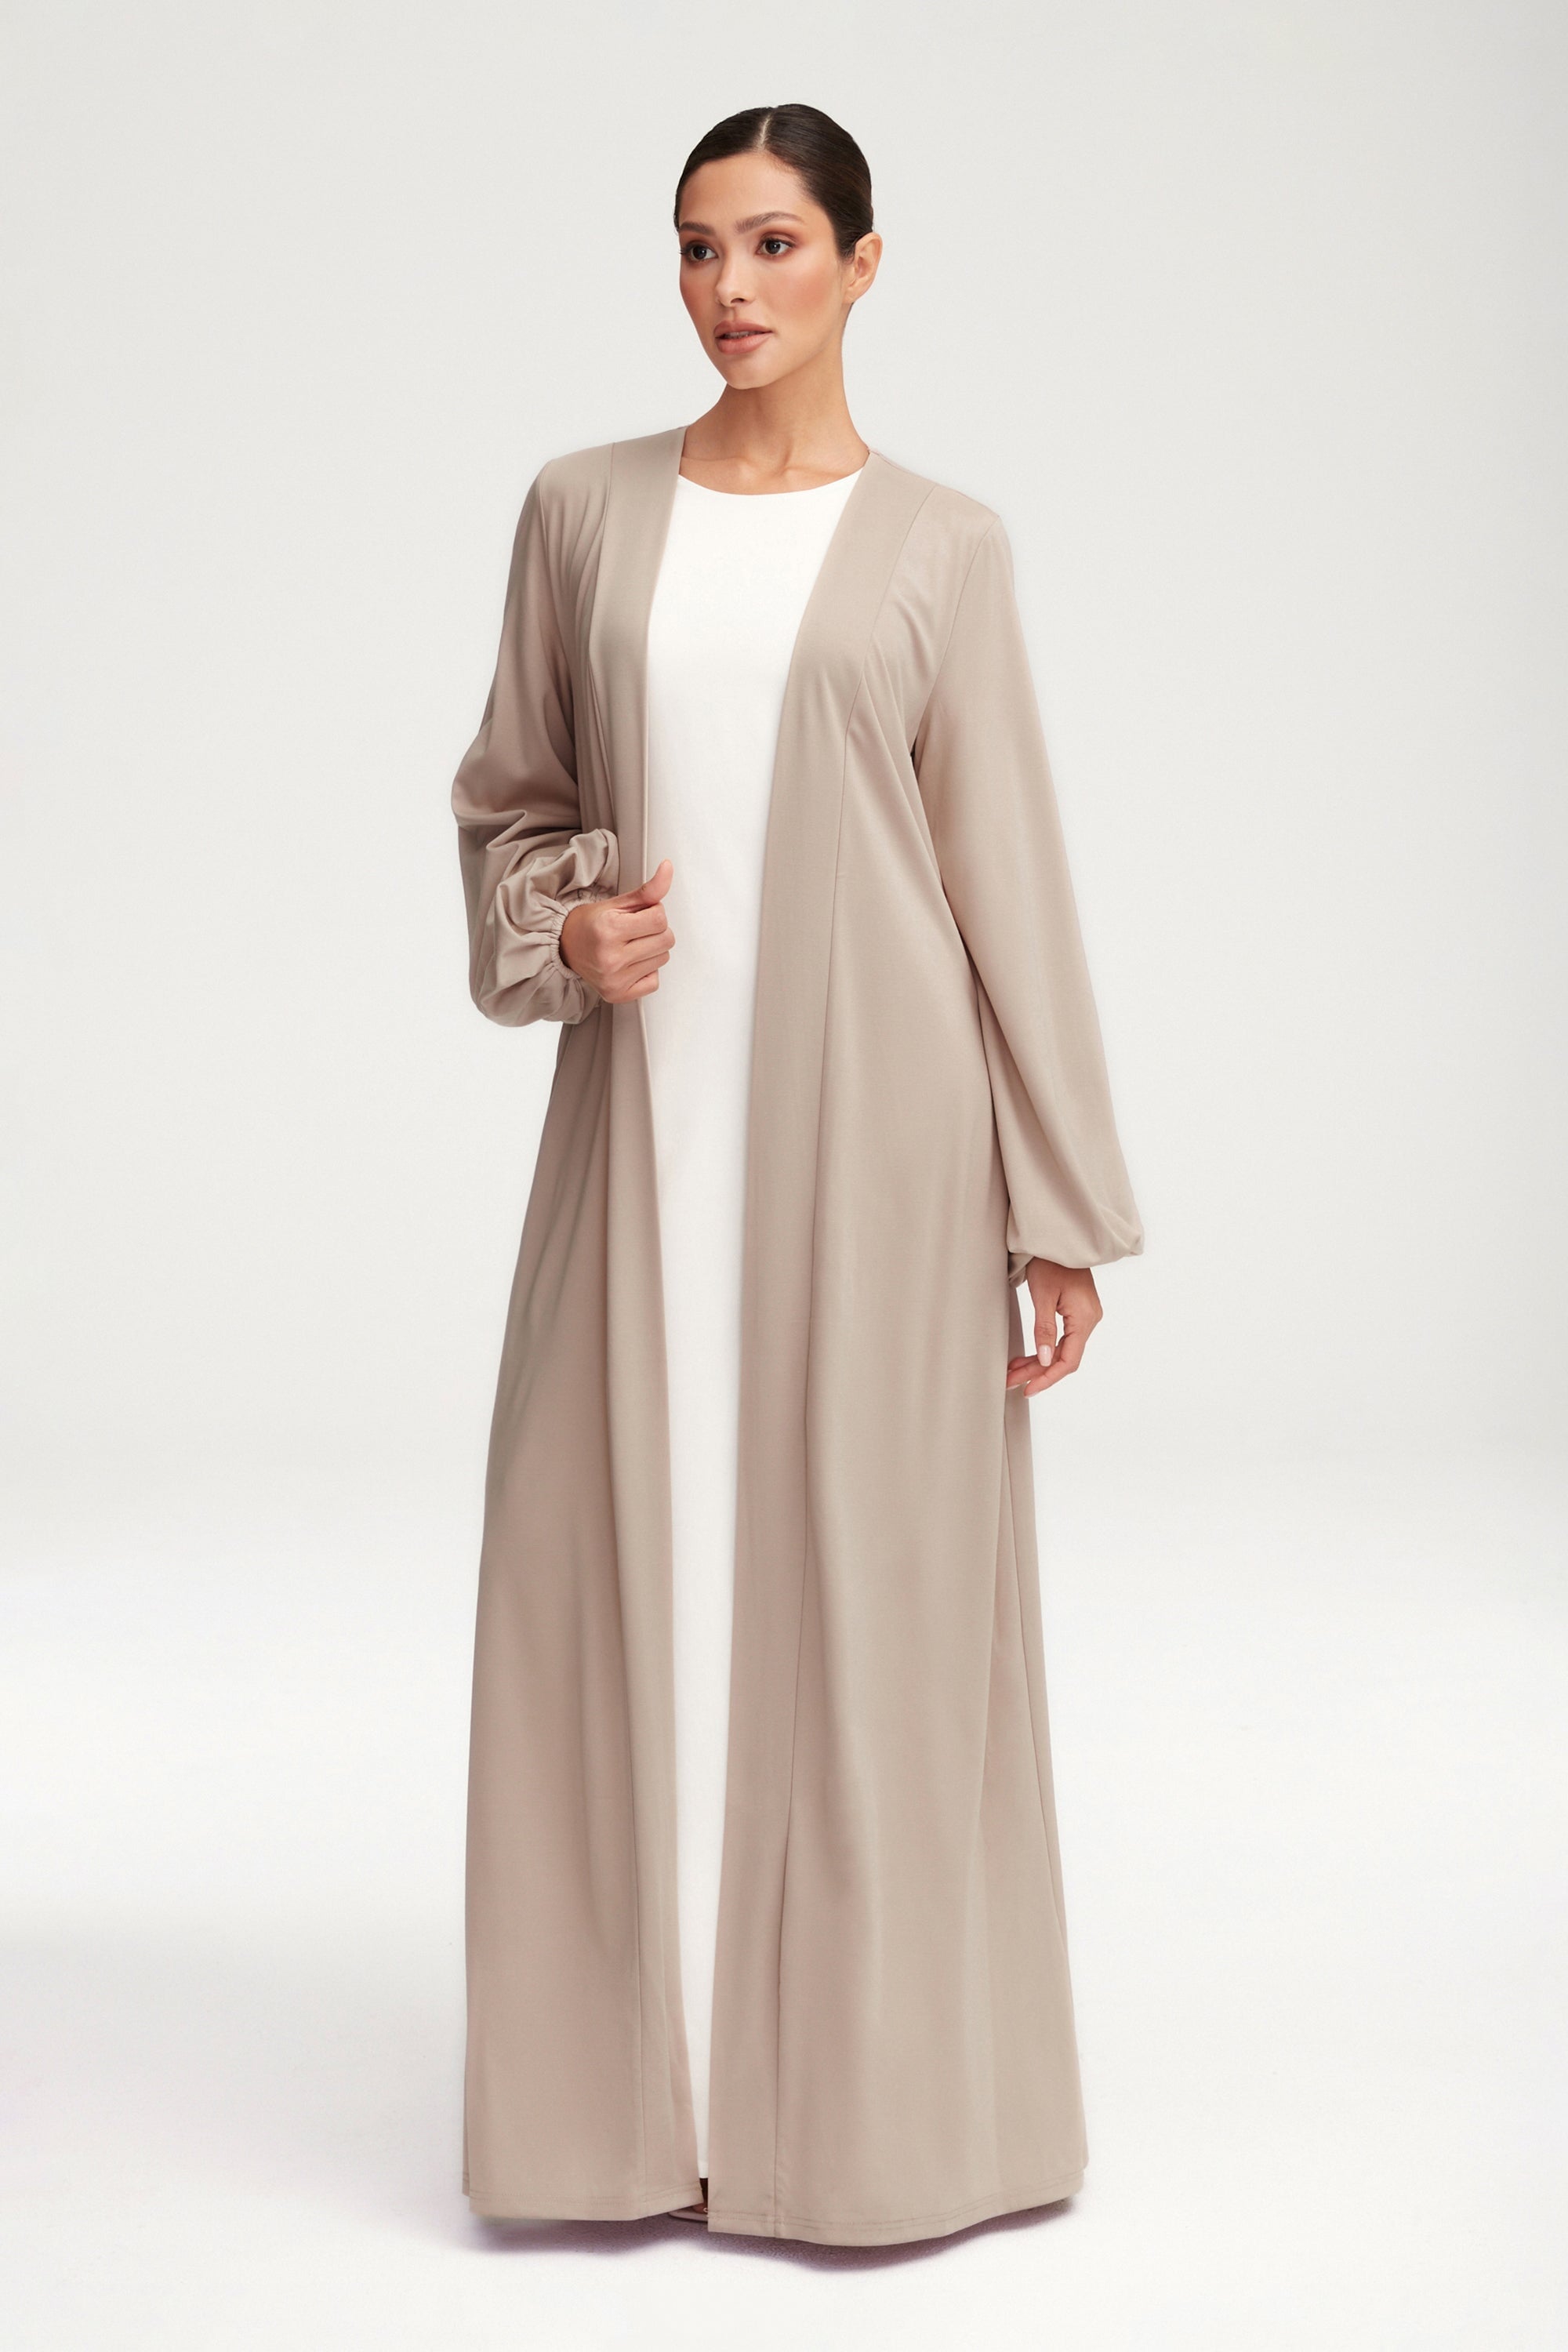 Essential Jersey Open Abaya - Stone Clothing Veiled 